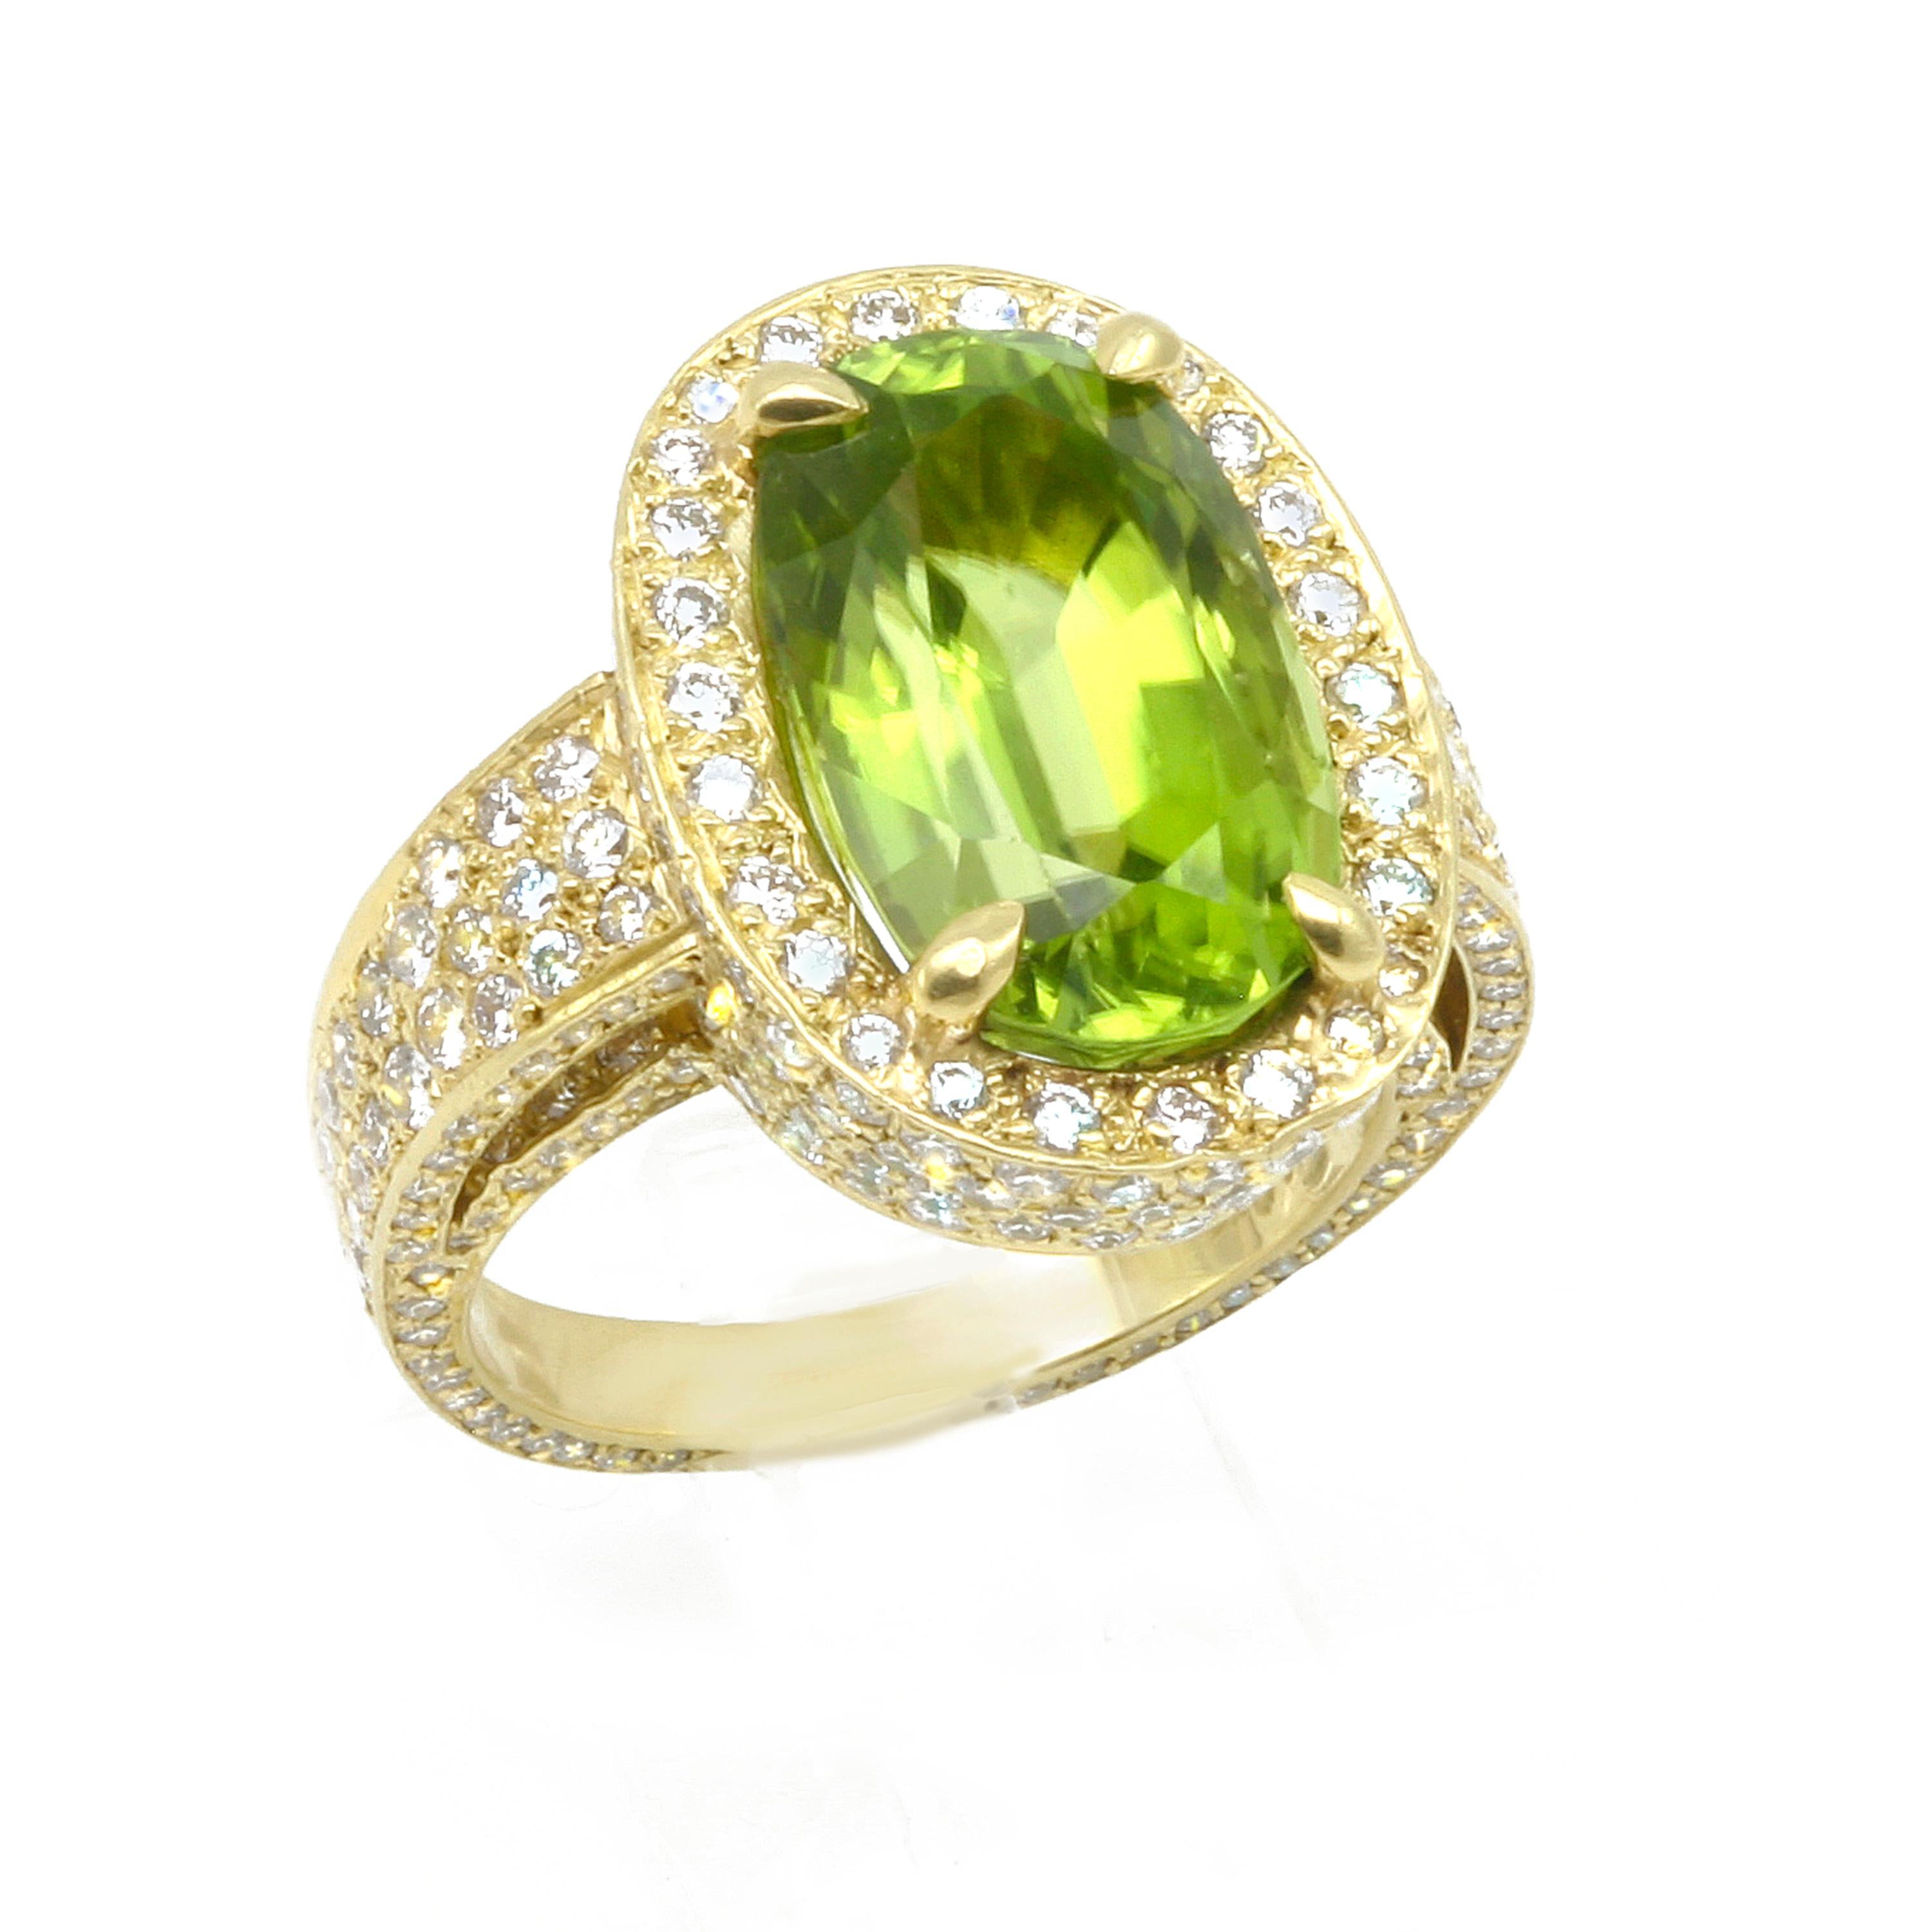 A statement ring, this 8.51 Carat Burmese Peridot Ring is set with 2.69  G-H color, VS2 Diamonds. Set in 18k Gold, the sparkle of almost three carats of diamonds gleam from all sides of this ring. The micro pave shanks are set inside the split sides